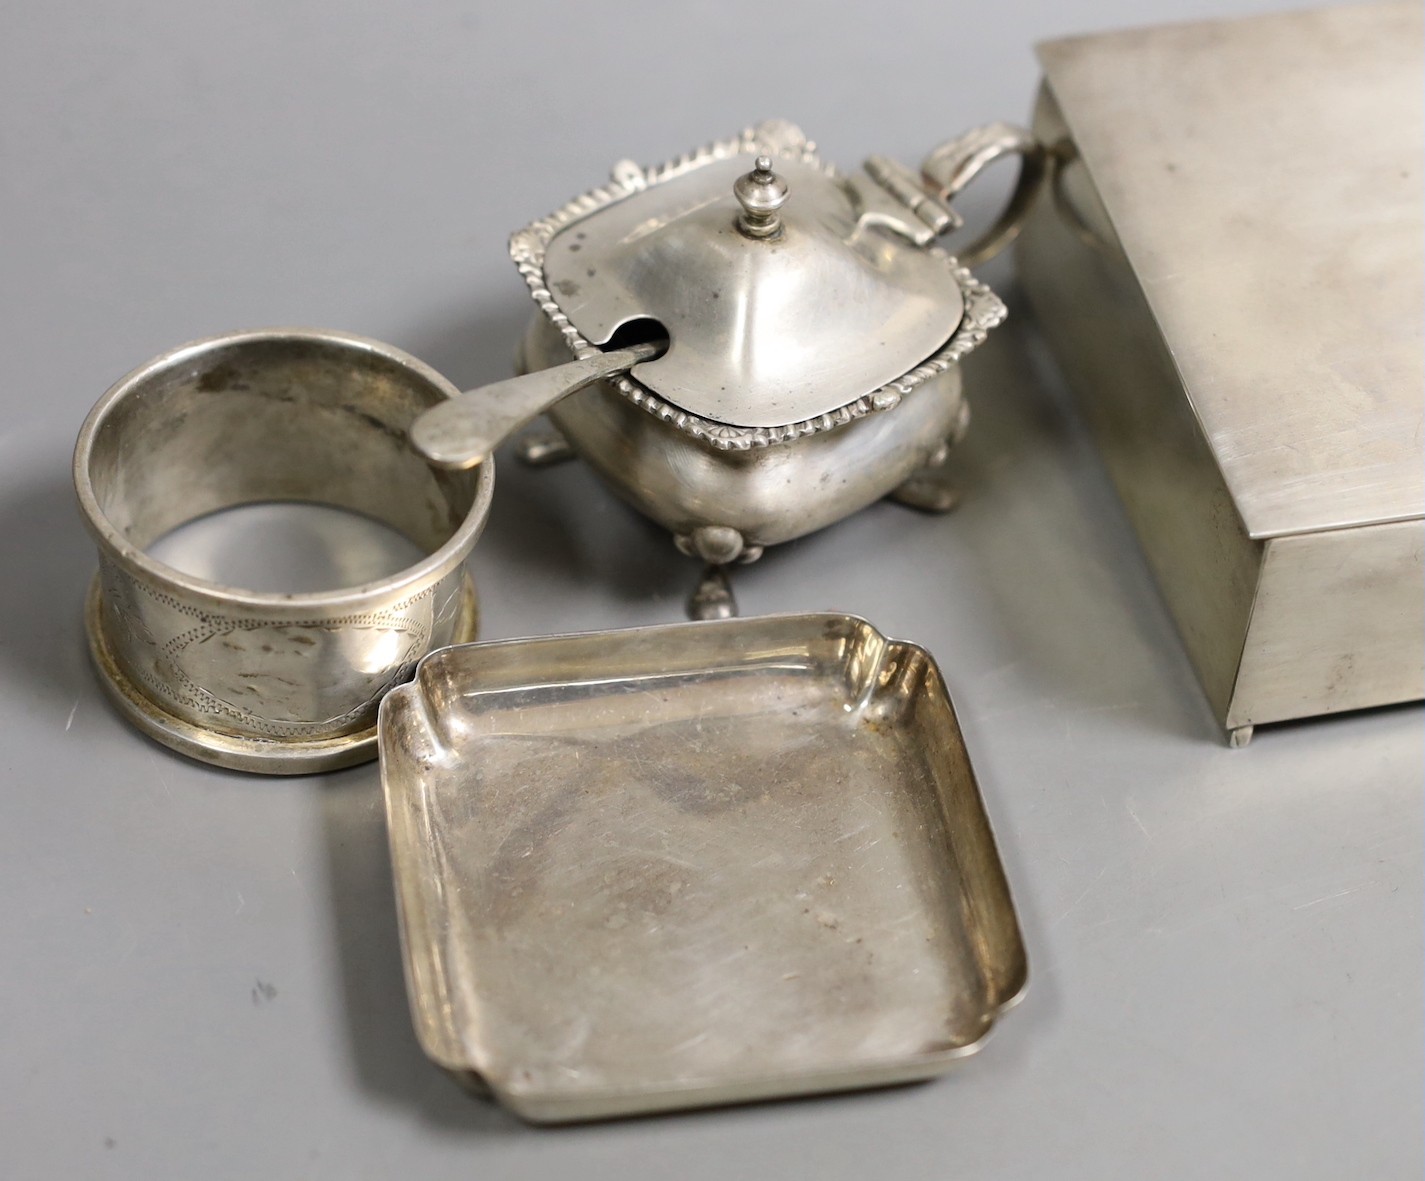 A George V silver mounted cigarette box, 11.5cm and other small sundry silver and plated items including napkin rings, condiments and small dish.